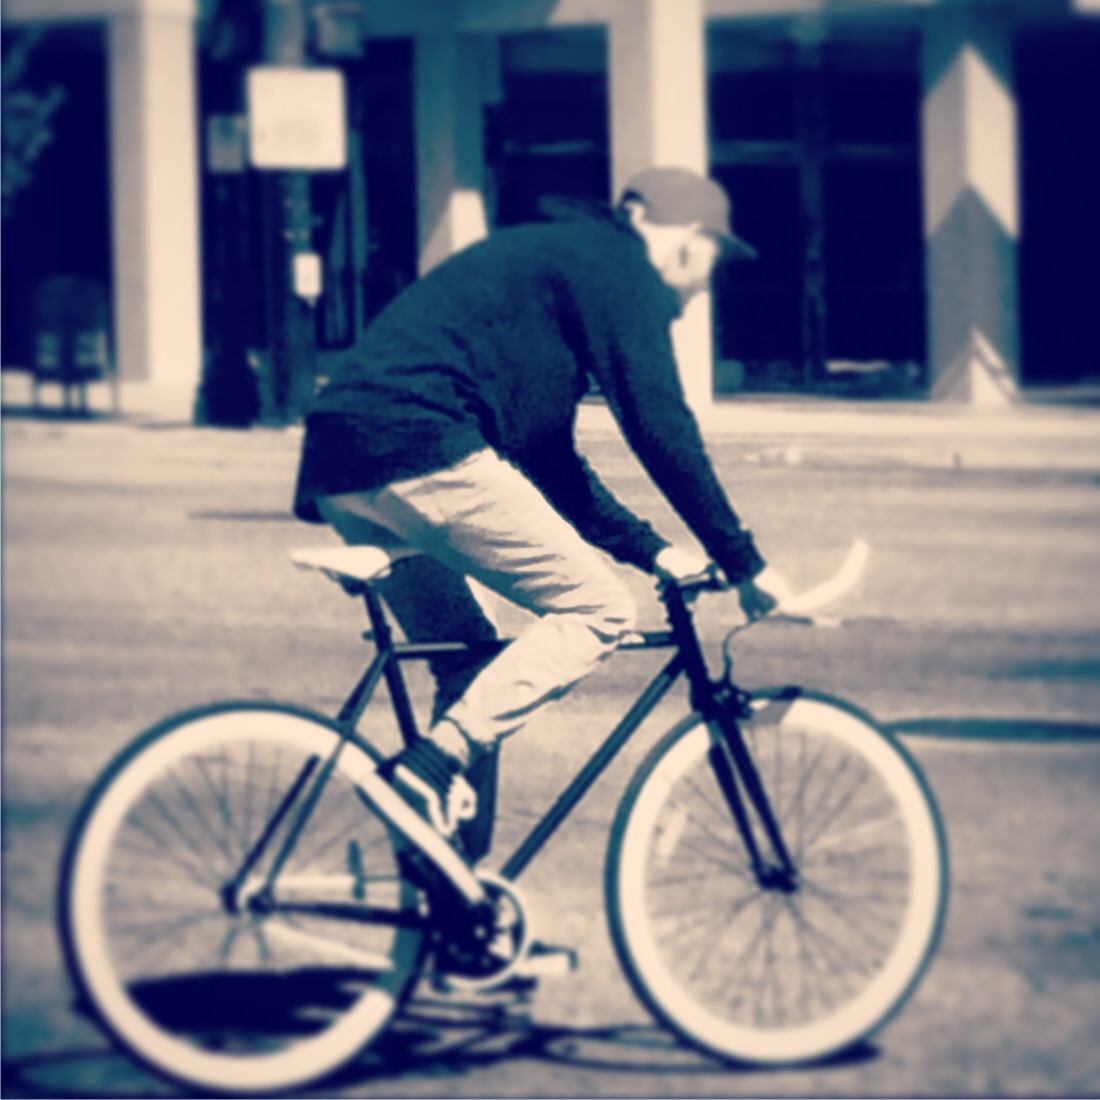 A fixed gear cyclist rides through downtown Salt Lake City, Utah on March 22, 2015. Photo by Dave Iltis